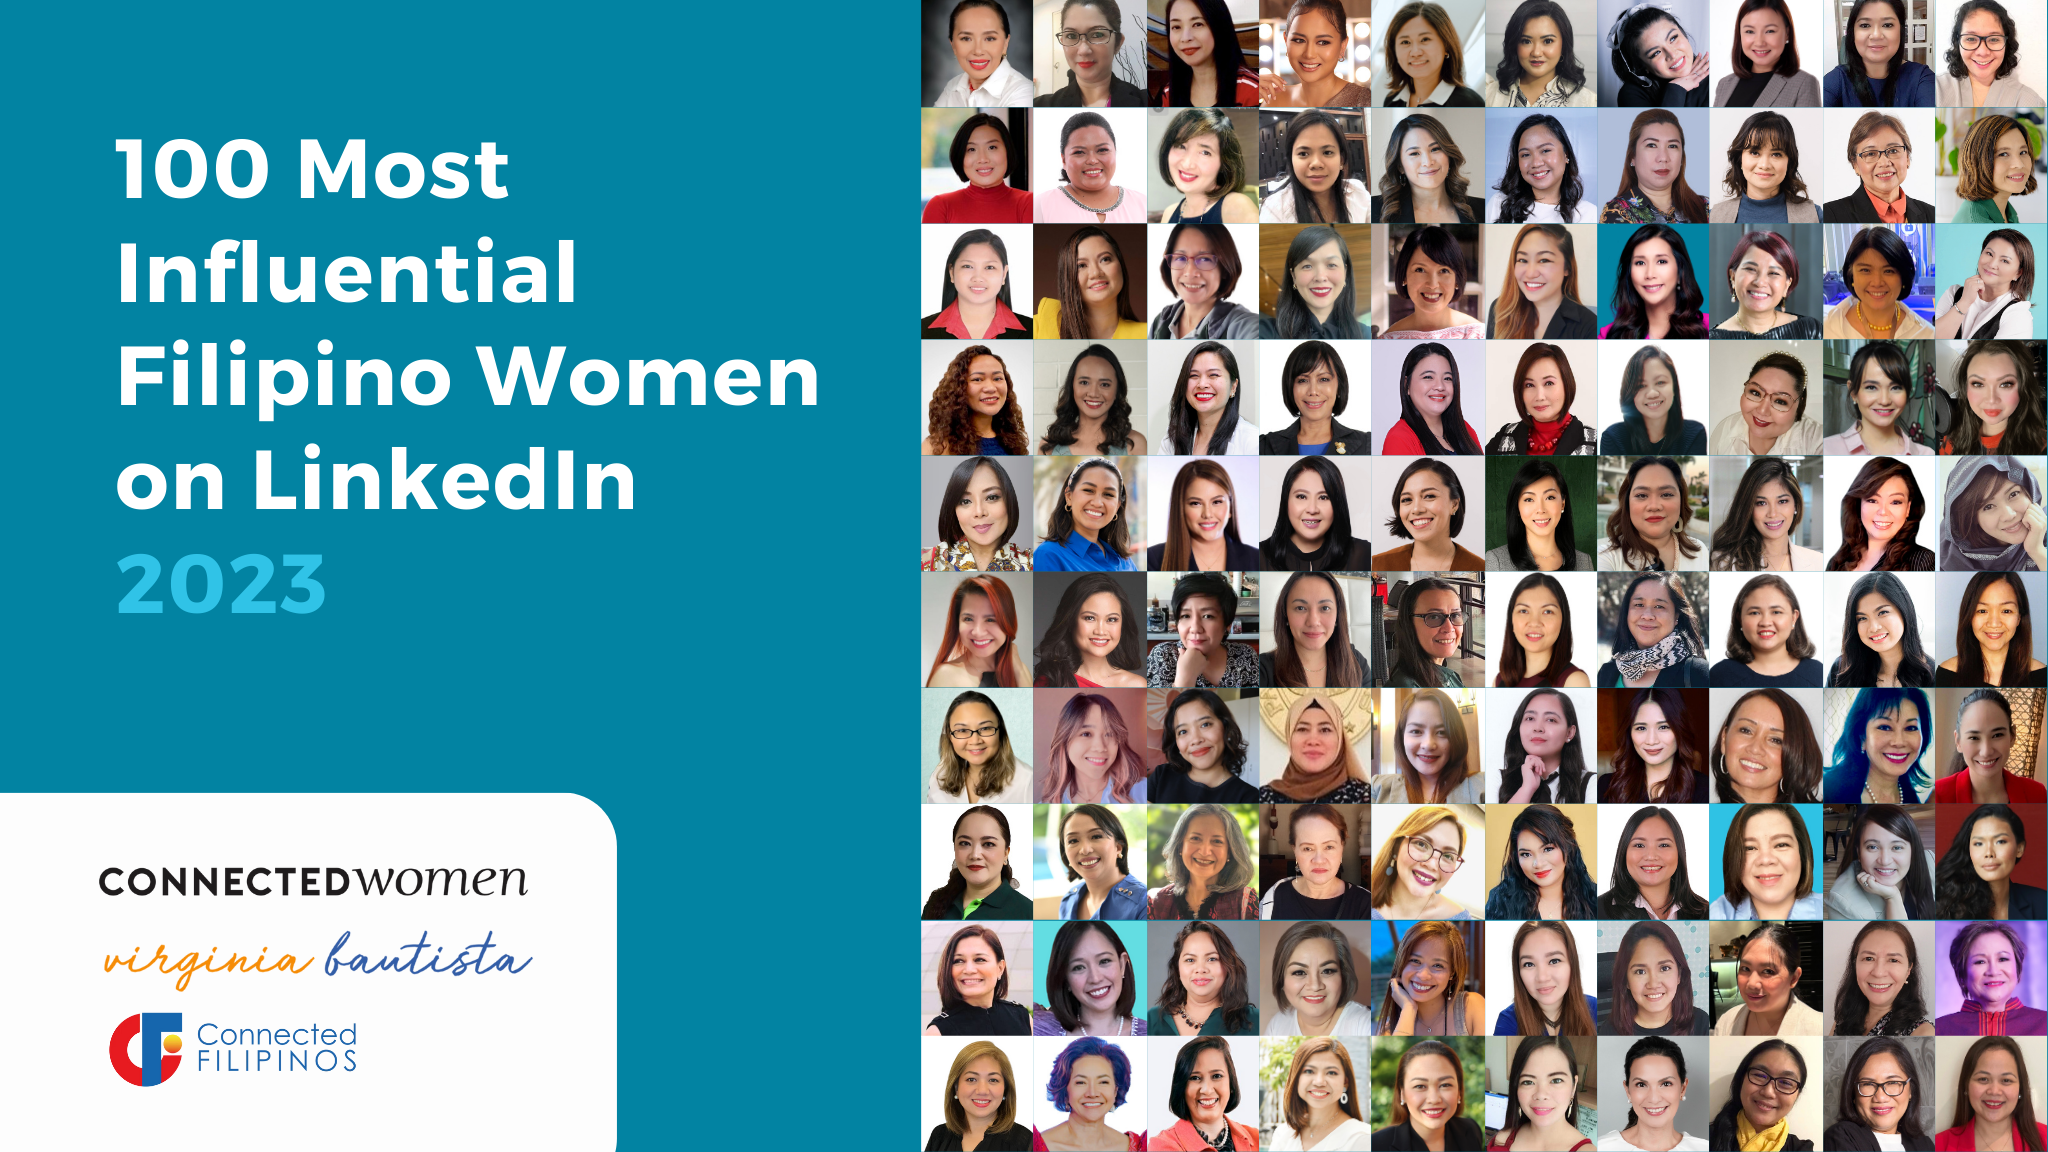 Top 100 Most Influential Filipino Women on LinkedIn 2023 image picture